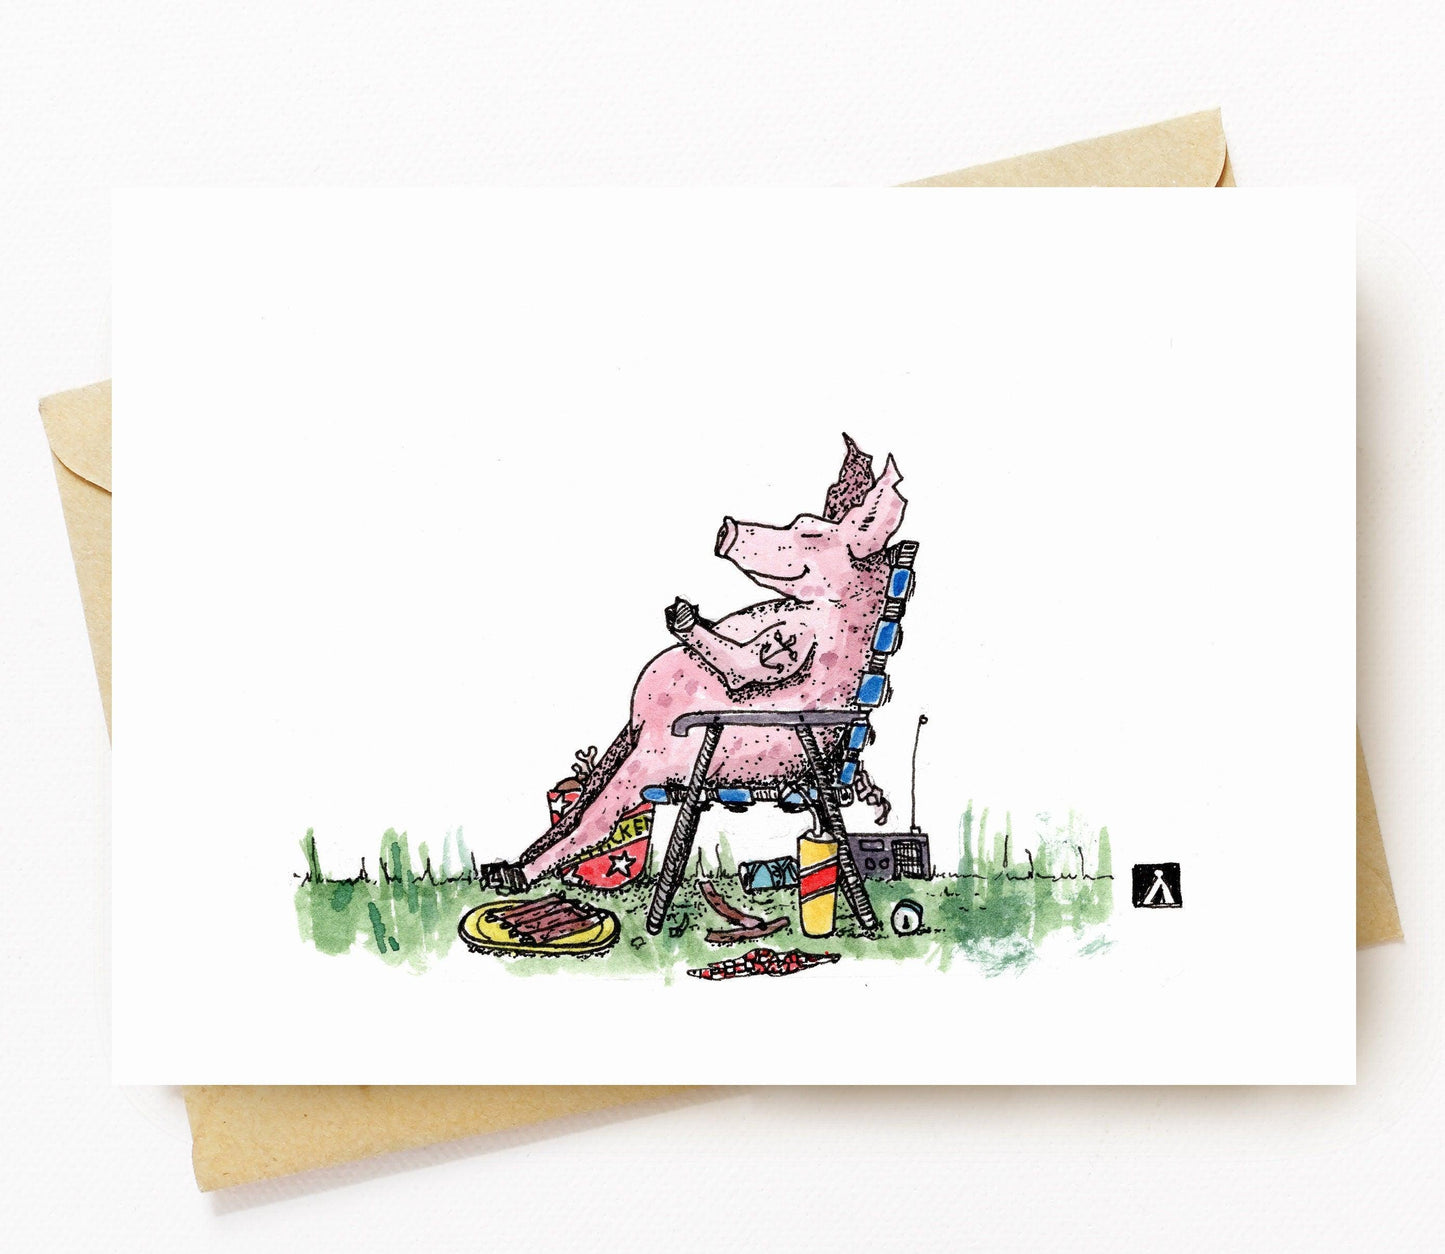 BellavanceInk: Greeting Card With Over Stuffed Pig In A Food Coma Pen & Ink Watercolor Illustration 5 x 7 Inches - BellavanceInk